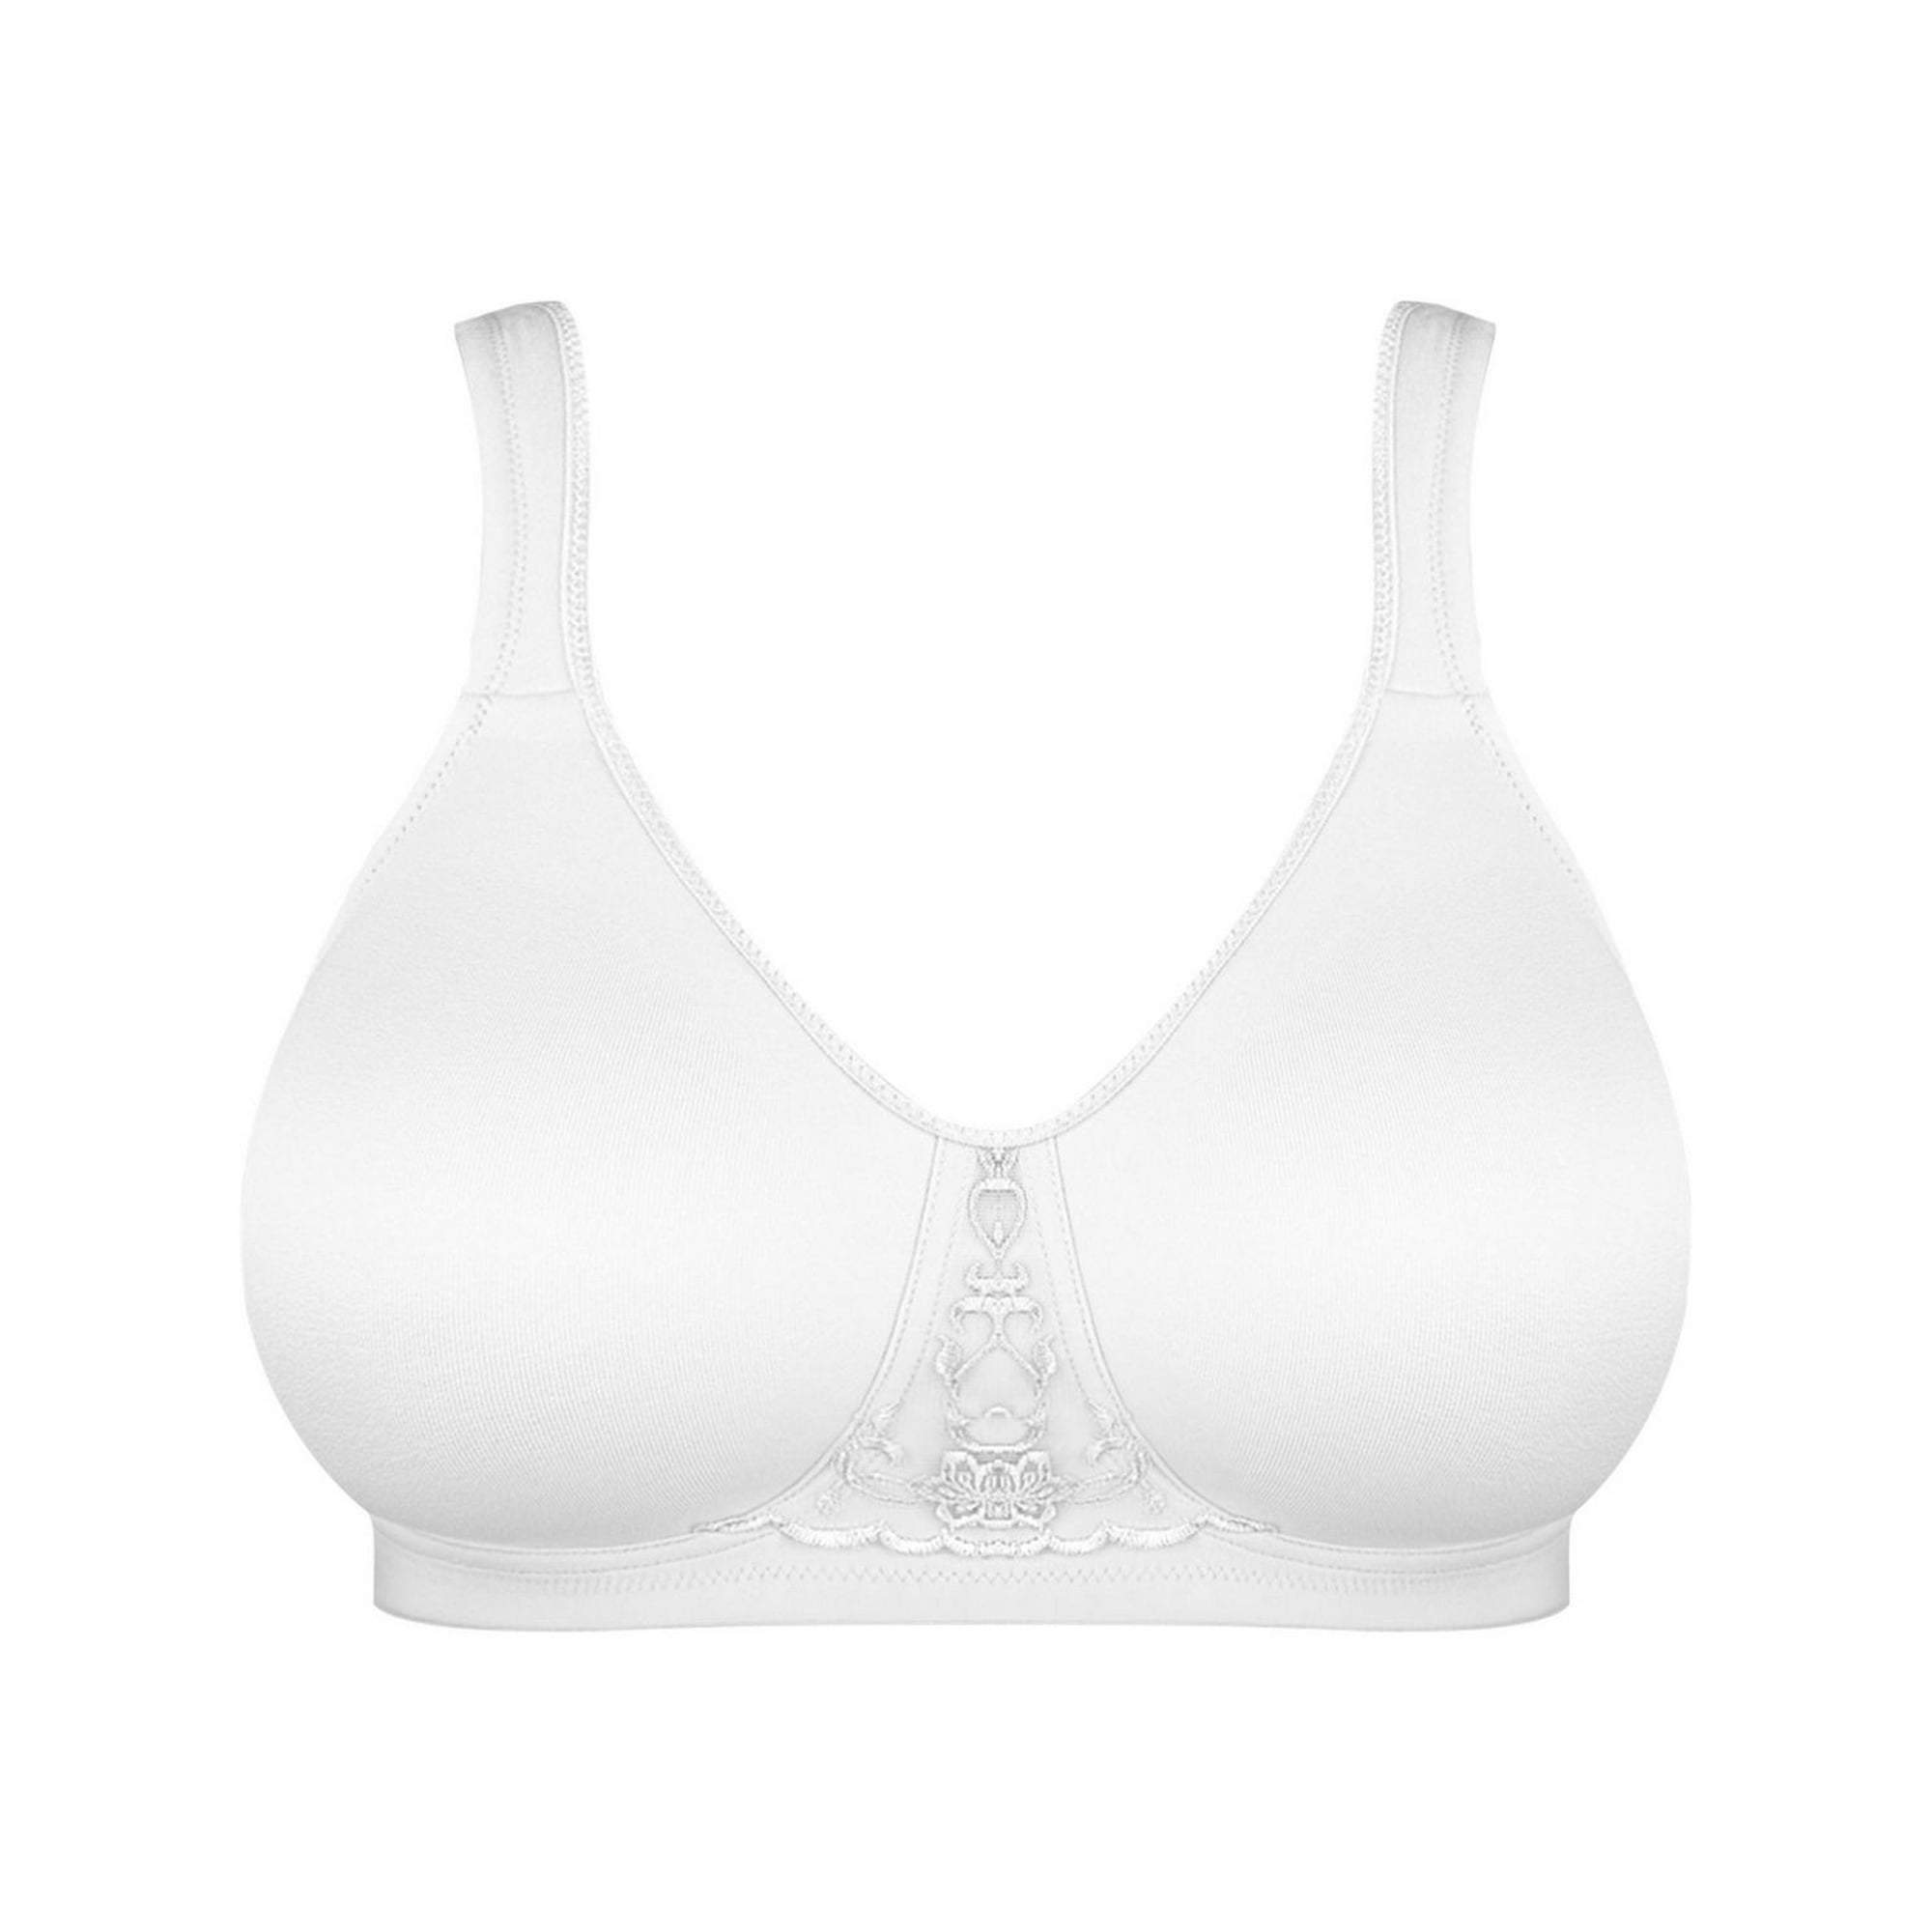 Exquisite Form #9671094 FULLY Full-Coverage Bra, Wire-Free, Available Sizes  40C - 48DDD 